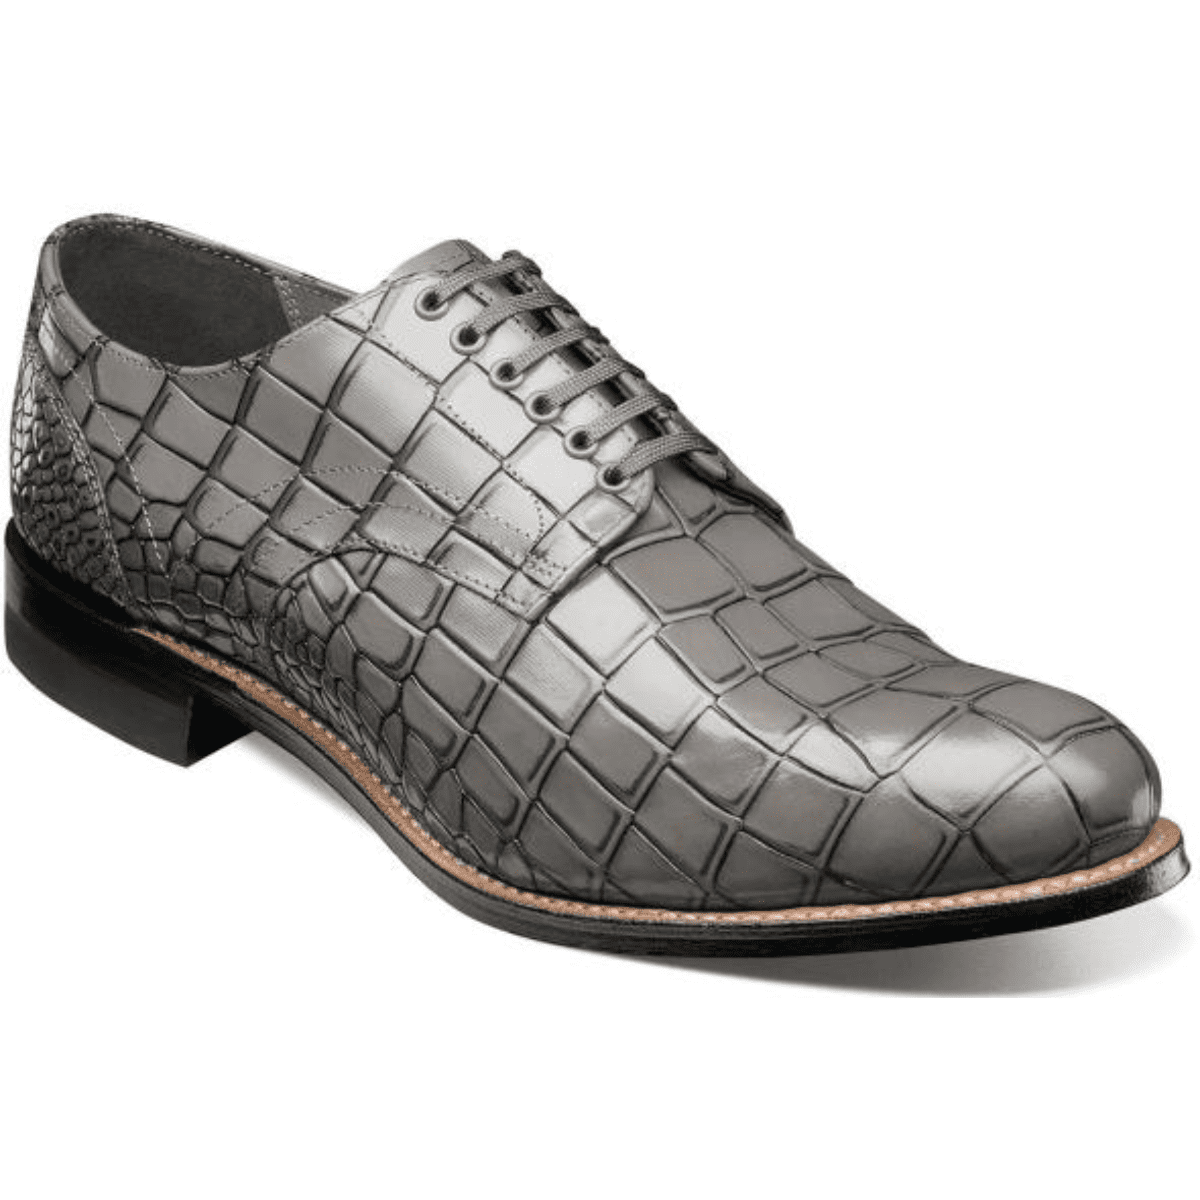 Stacy Adams - Stacy Adams Madison Oxford Shoes crocodile Print Leather ...